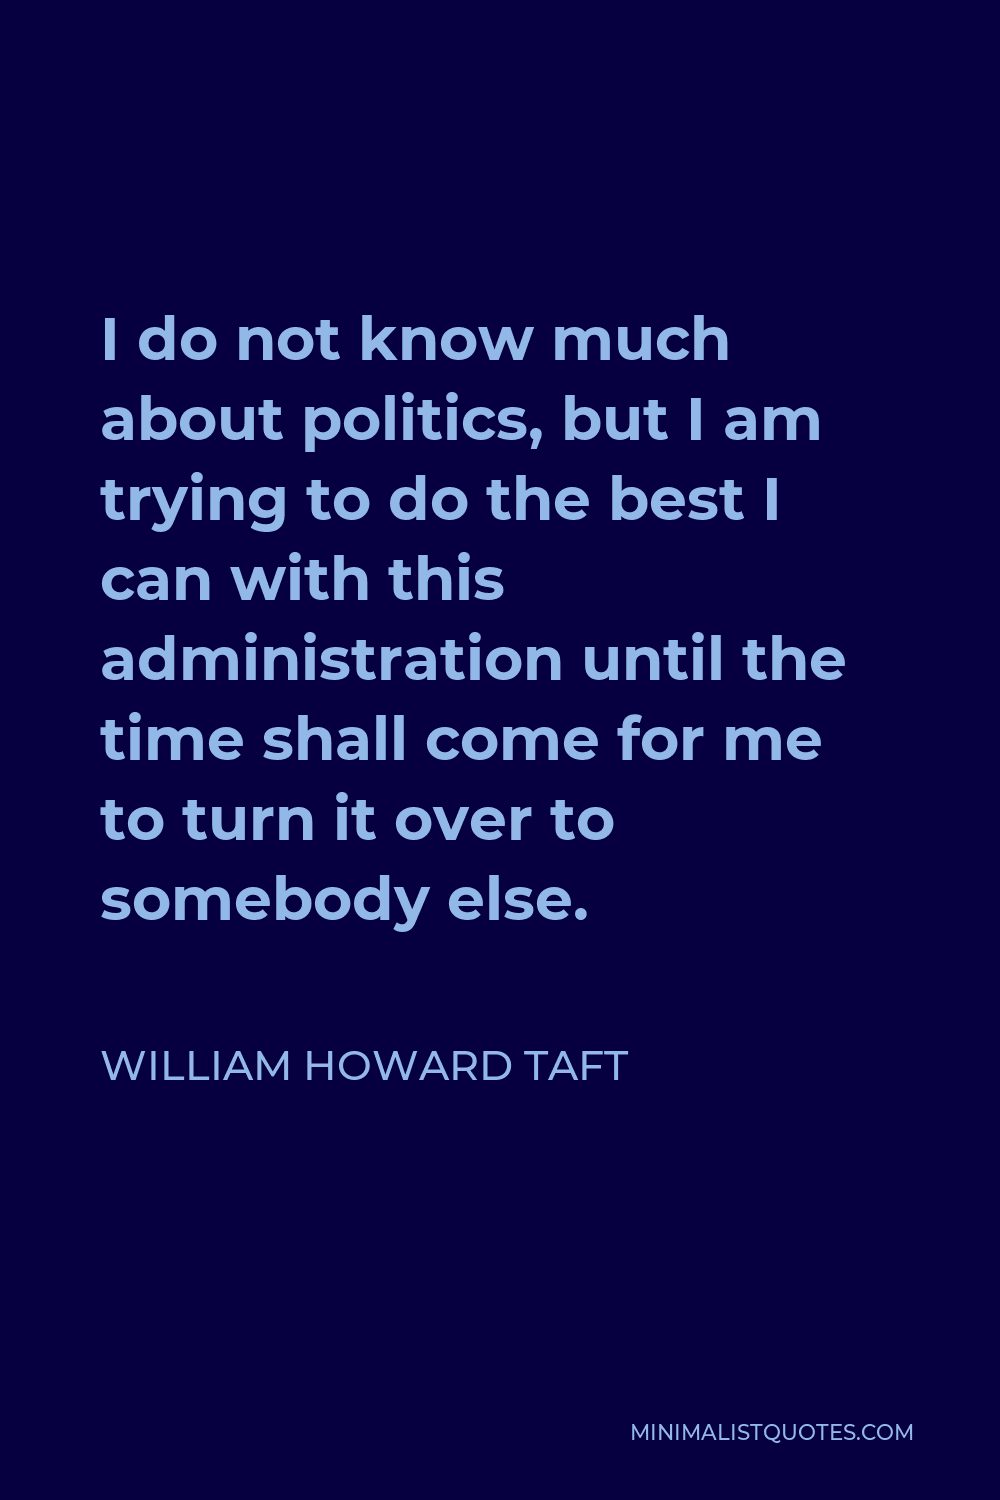 William Howard Taft Quote - I do not know much about politics, but I am trying to do the best I can with this administration until the time shall come for me to turn it over to somebody else.